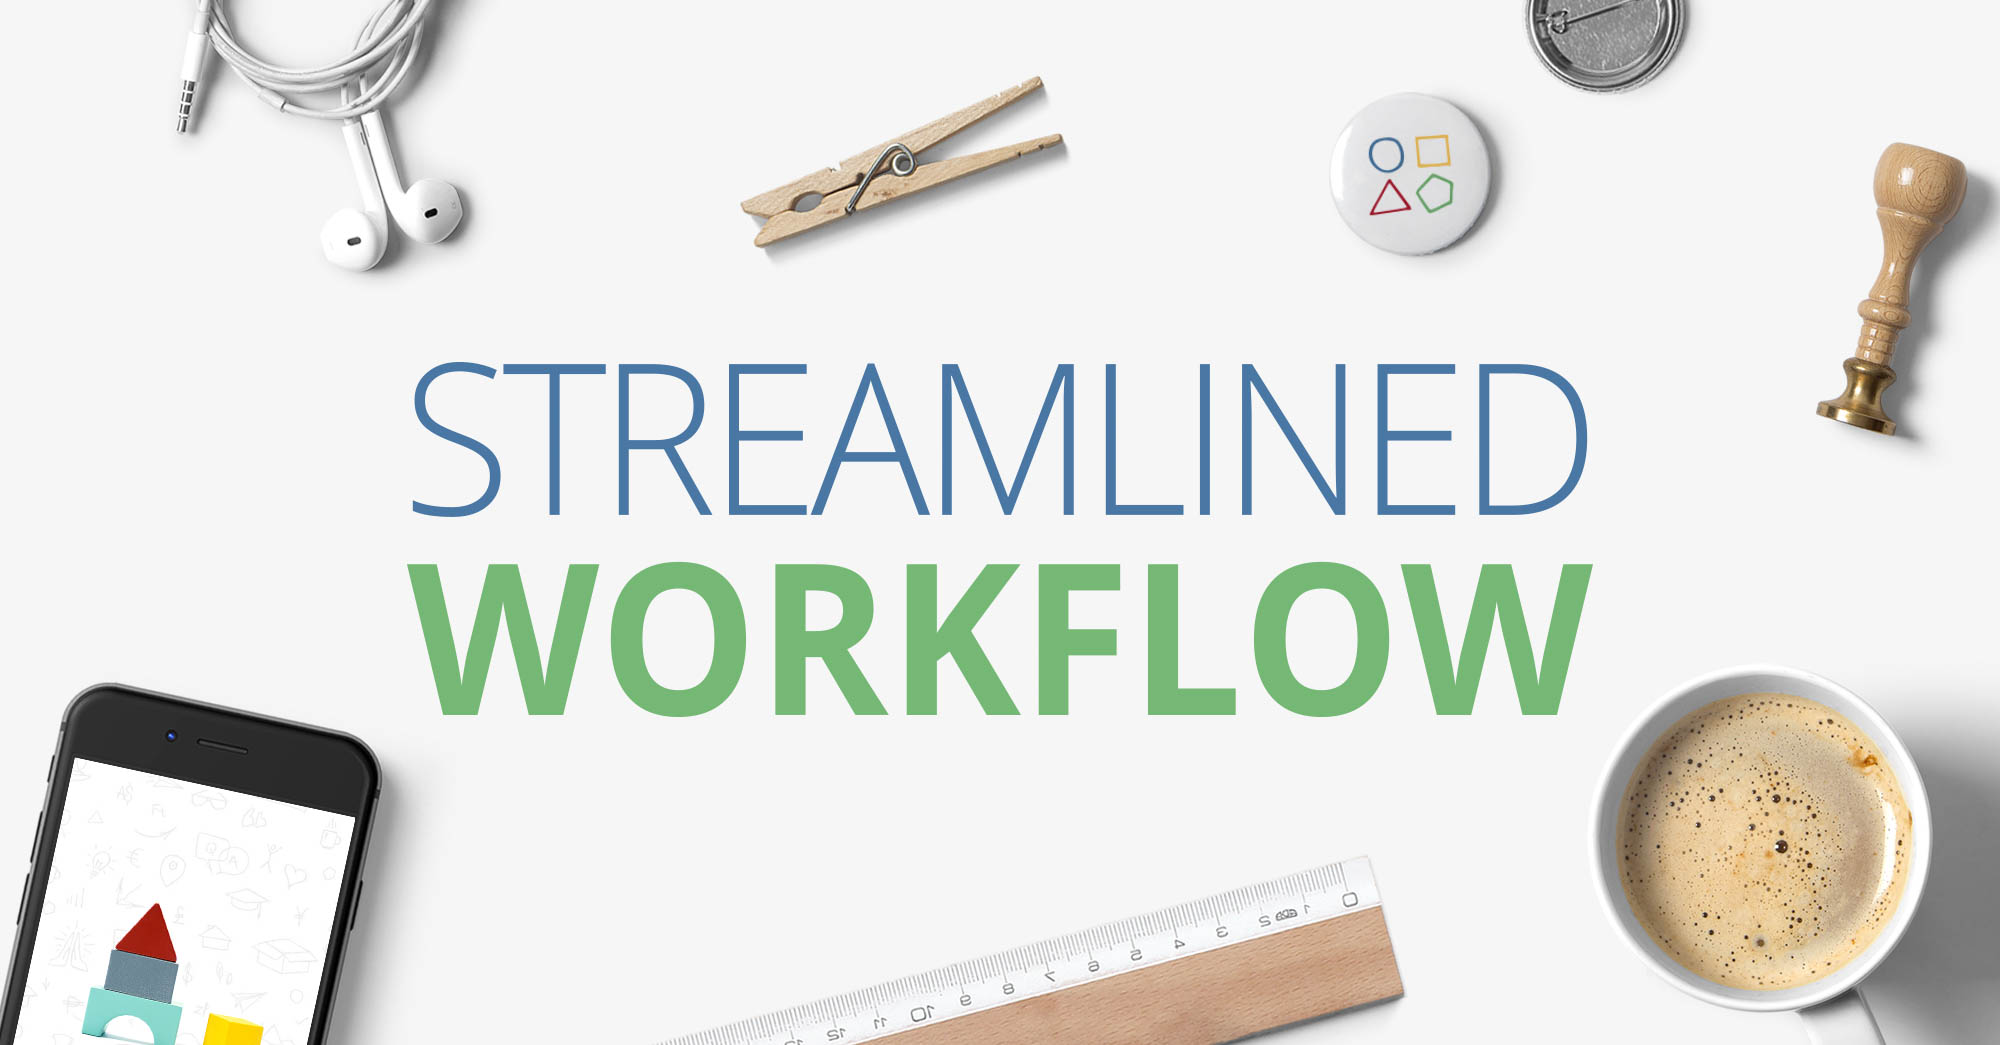 Digital HR – Your Must-Have Tools For a Streamlined Workflow